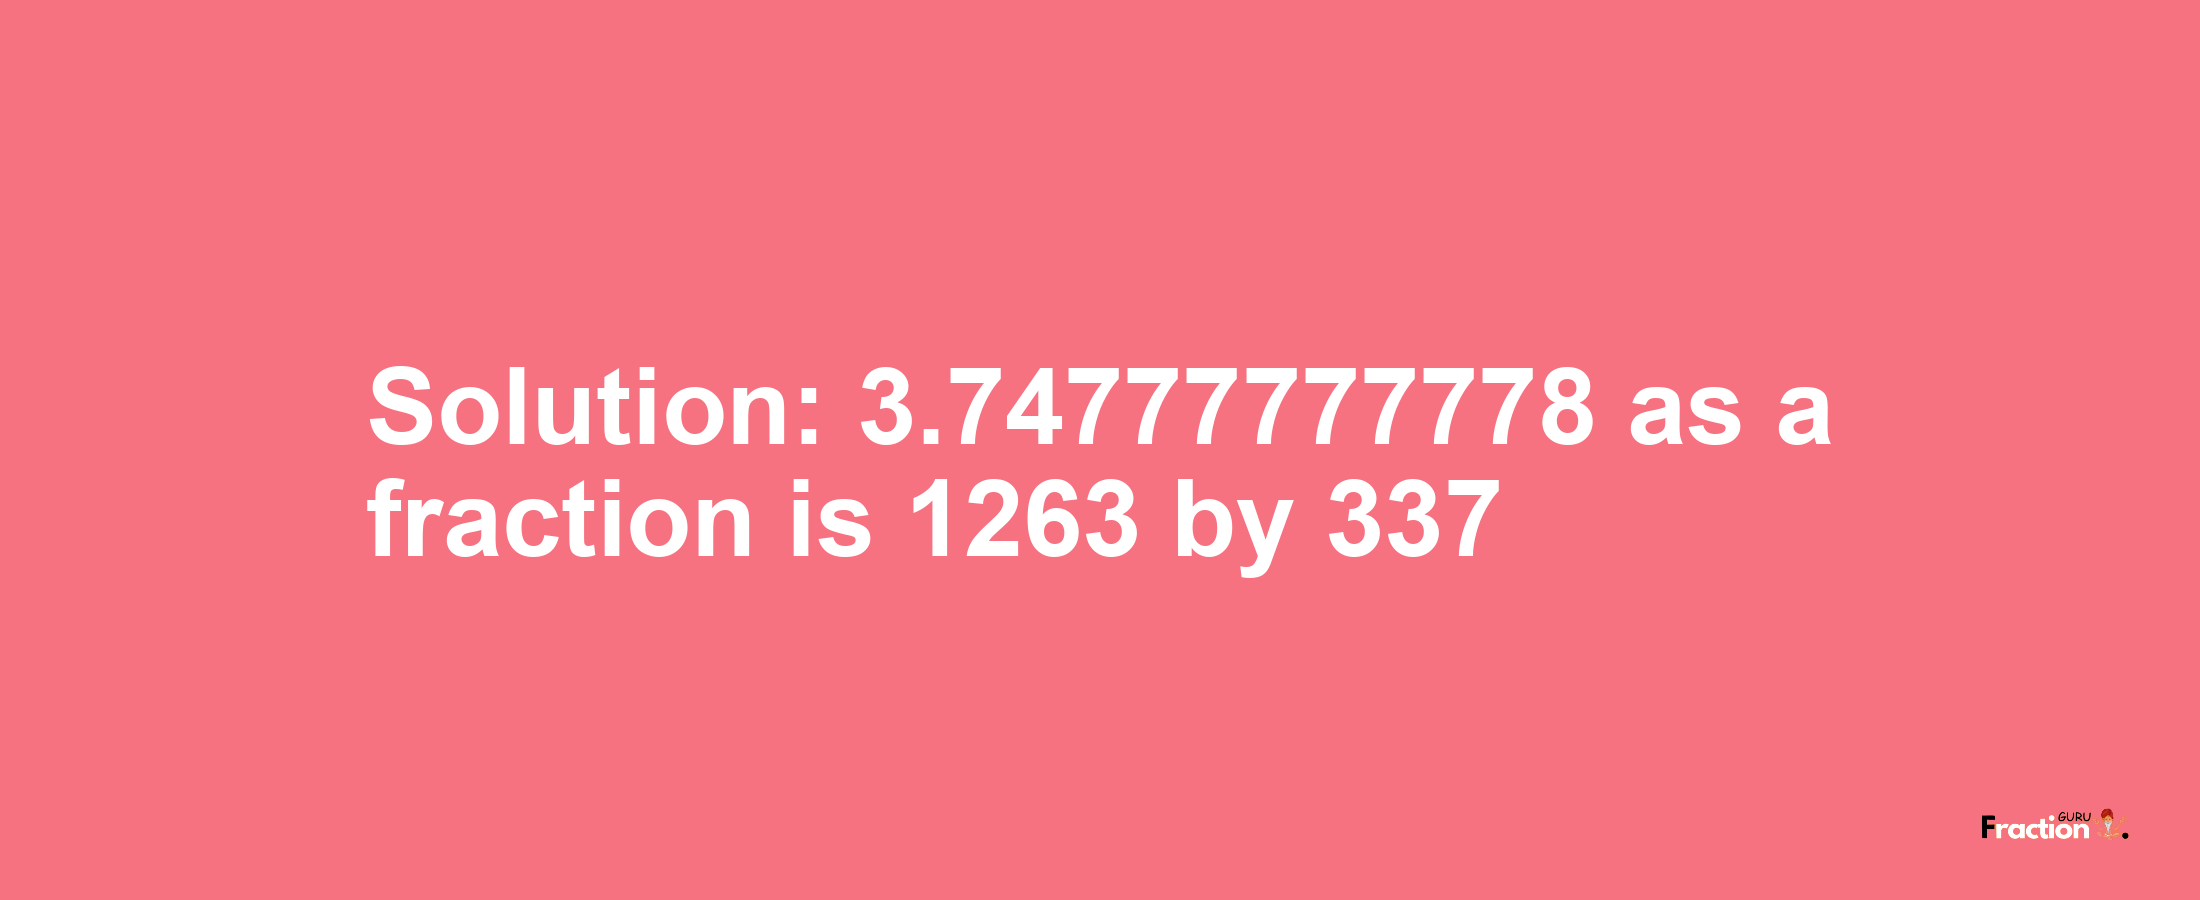 Solution:3.74777777778 as a fraction is 1263/337